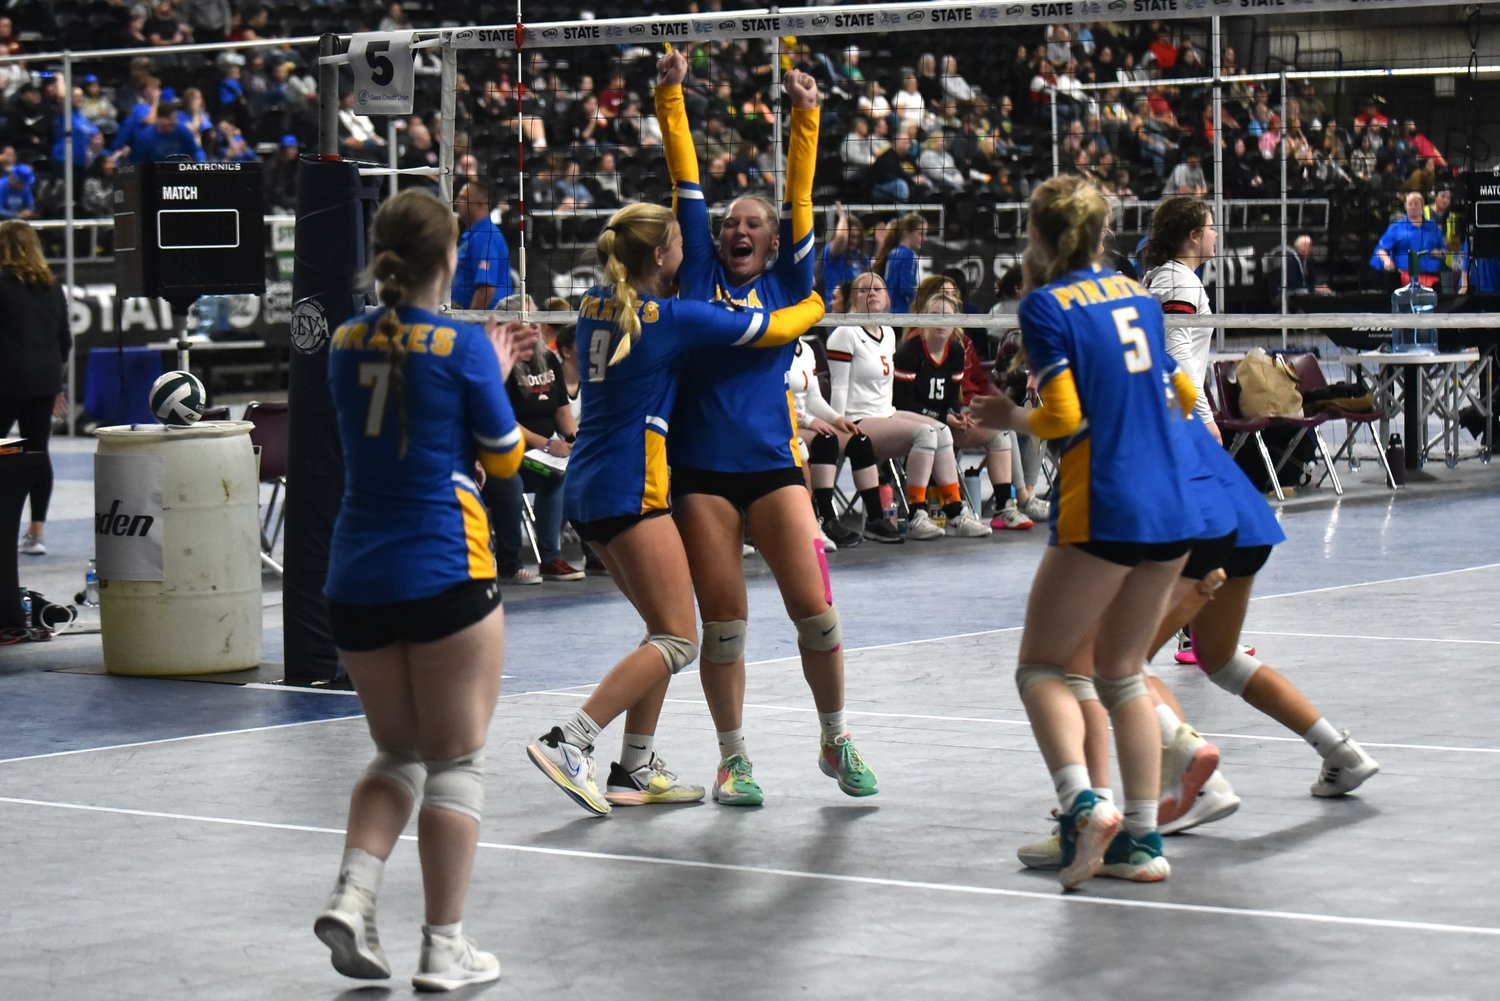 Danika Hallom (9), Kendall Humphrey (getting hugged), and the Adna Pirates celebrate a point during the fifth set of their win over Lind-Ritzville-Sprague-Washtucna-Harrington in the fifth-place game at the 2B state tournament on Nov. 11 in Yakima.